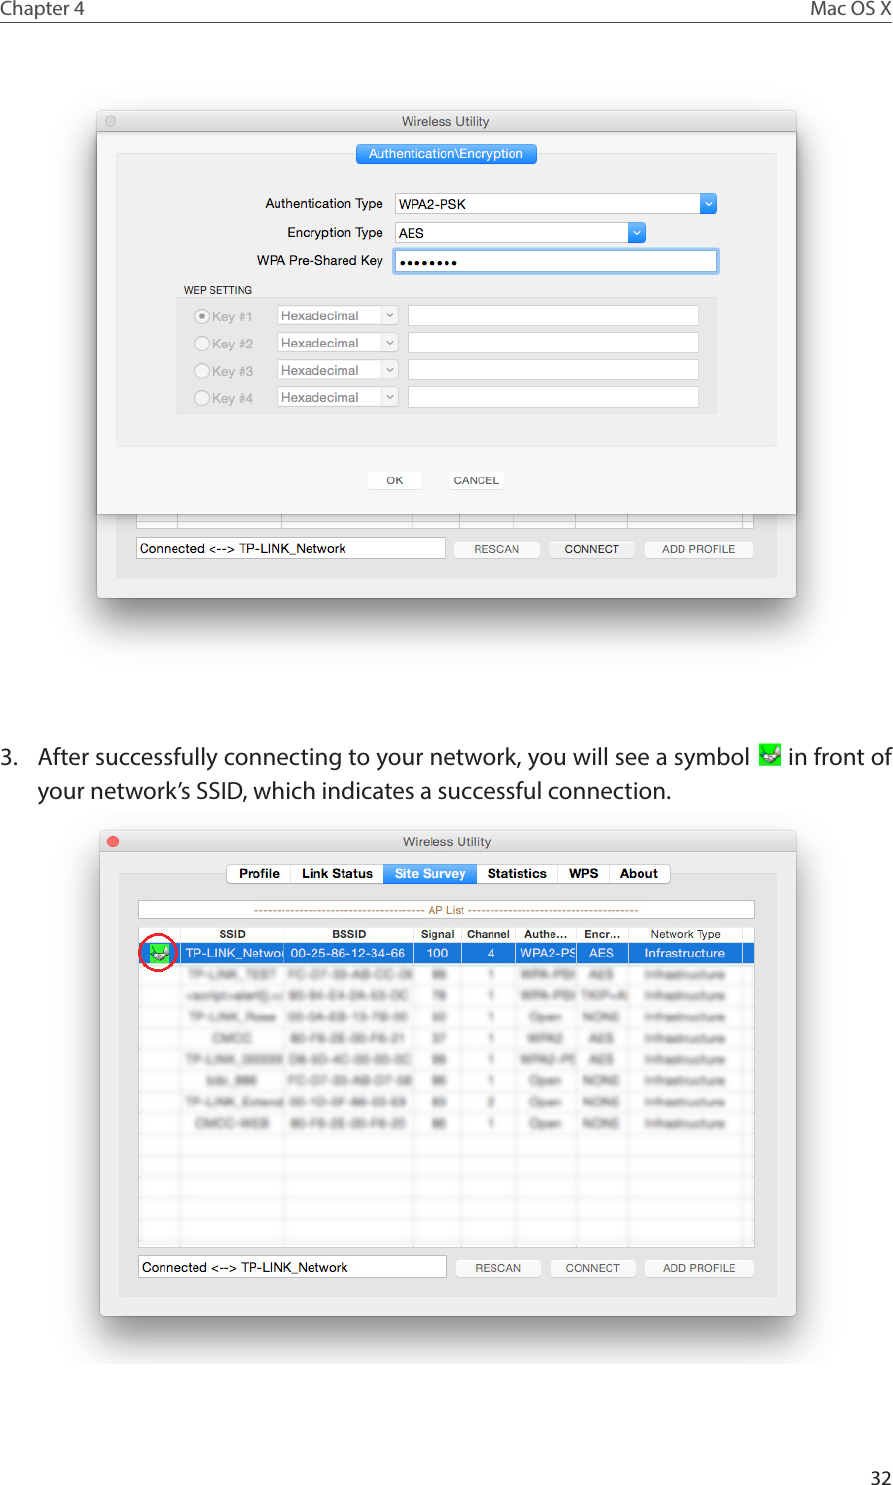 32Chapter 4 Mac OS X3.  After successfully connecting to your network, you will see a symbol   in front of your network’s SSID, which indicates a successful connection.